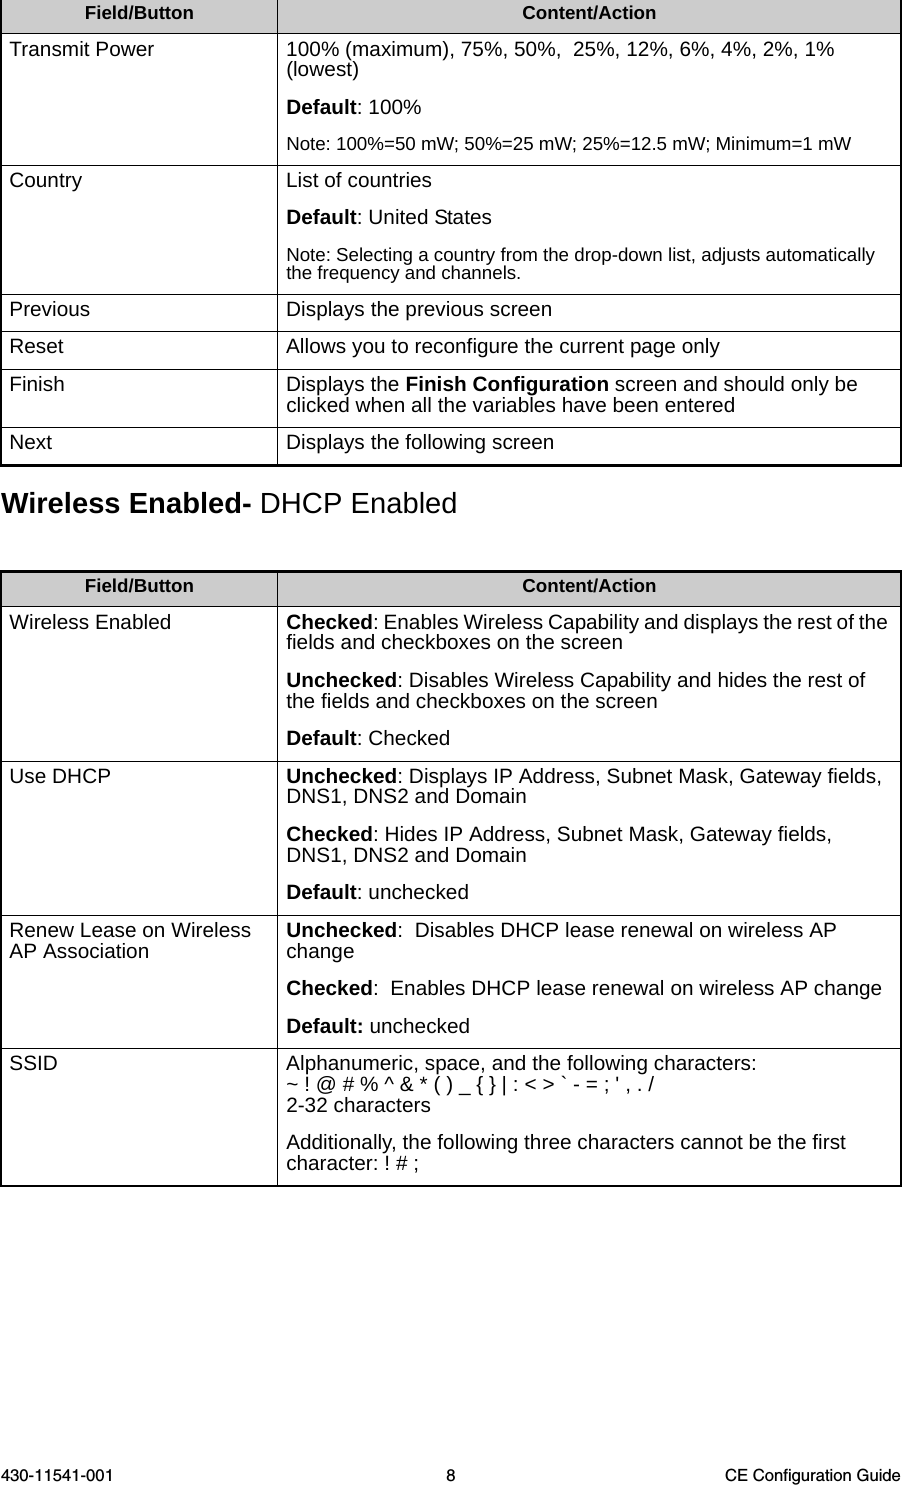 430-11541-001 8 CE Configuration GuideWireless Enabled- DHCP EnabledTransmit Power 100% (maximum), 75%, 50%,  25%, 12%, 6%, 4%, 2%, 1% (lowest)Default: 100%Note: 100%=50 mW; 50%=25 mW; 25%=12.5 mW; Minimum=1 mWCountry List of countriesDefault: United StatesNote: Selecting a country from the drop-down list, adjusts automatically the frequency and channels.Previous Displays the previous screenReset Allows you to reconfigure the current page onlyFinish Displays the Finish Configuration screen and should only be clicked when all the variables have been enteredNext Displays the following screenField/Button Content/ActionWireless Enabled Checked: Enables Wireless Capability and displays the rest of the fields and checkboxes on the screen  Unchecked: Disables Wireless Capability and hides the rest of the fields and checkboxes on the screen  Default: Checked Use DHCP  Unchecked: Displays IP Address, Subnet Mask, Gateway fields, DNS1, DNS2 and DomainChecked: Hides IP Address, Subnet Mask, Gateway fields, DNS1, DNS2 and DomainDefault: unchecked Renew Lease on Wireless AP Association Unchecked:  Disables DHCP lease renewal on wireless AP changeChecked:  Enables DHCP lease renewal on wireless AP changeDefault: uncheckedSSID  Alphanumeric, space, and the following characters: ~ ! @ # % ^ &amp; * ( ) _ { } | : &lt; &gt; ` - = ; &apos; , . /2-32 charactersAdditionally, the following three characters cannot be the first character: ! # ;Field/Button Content/Action